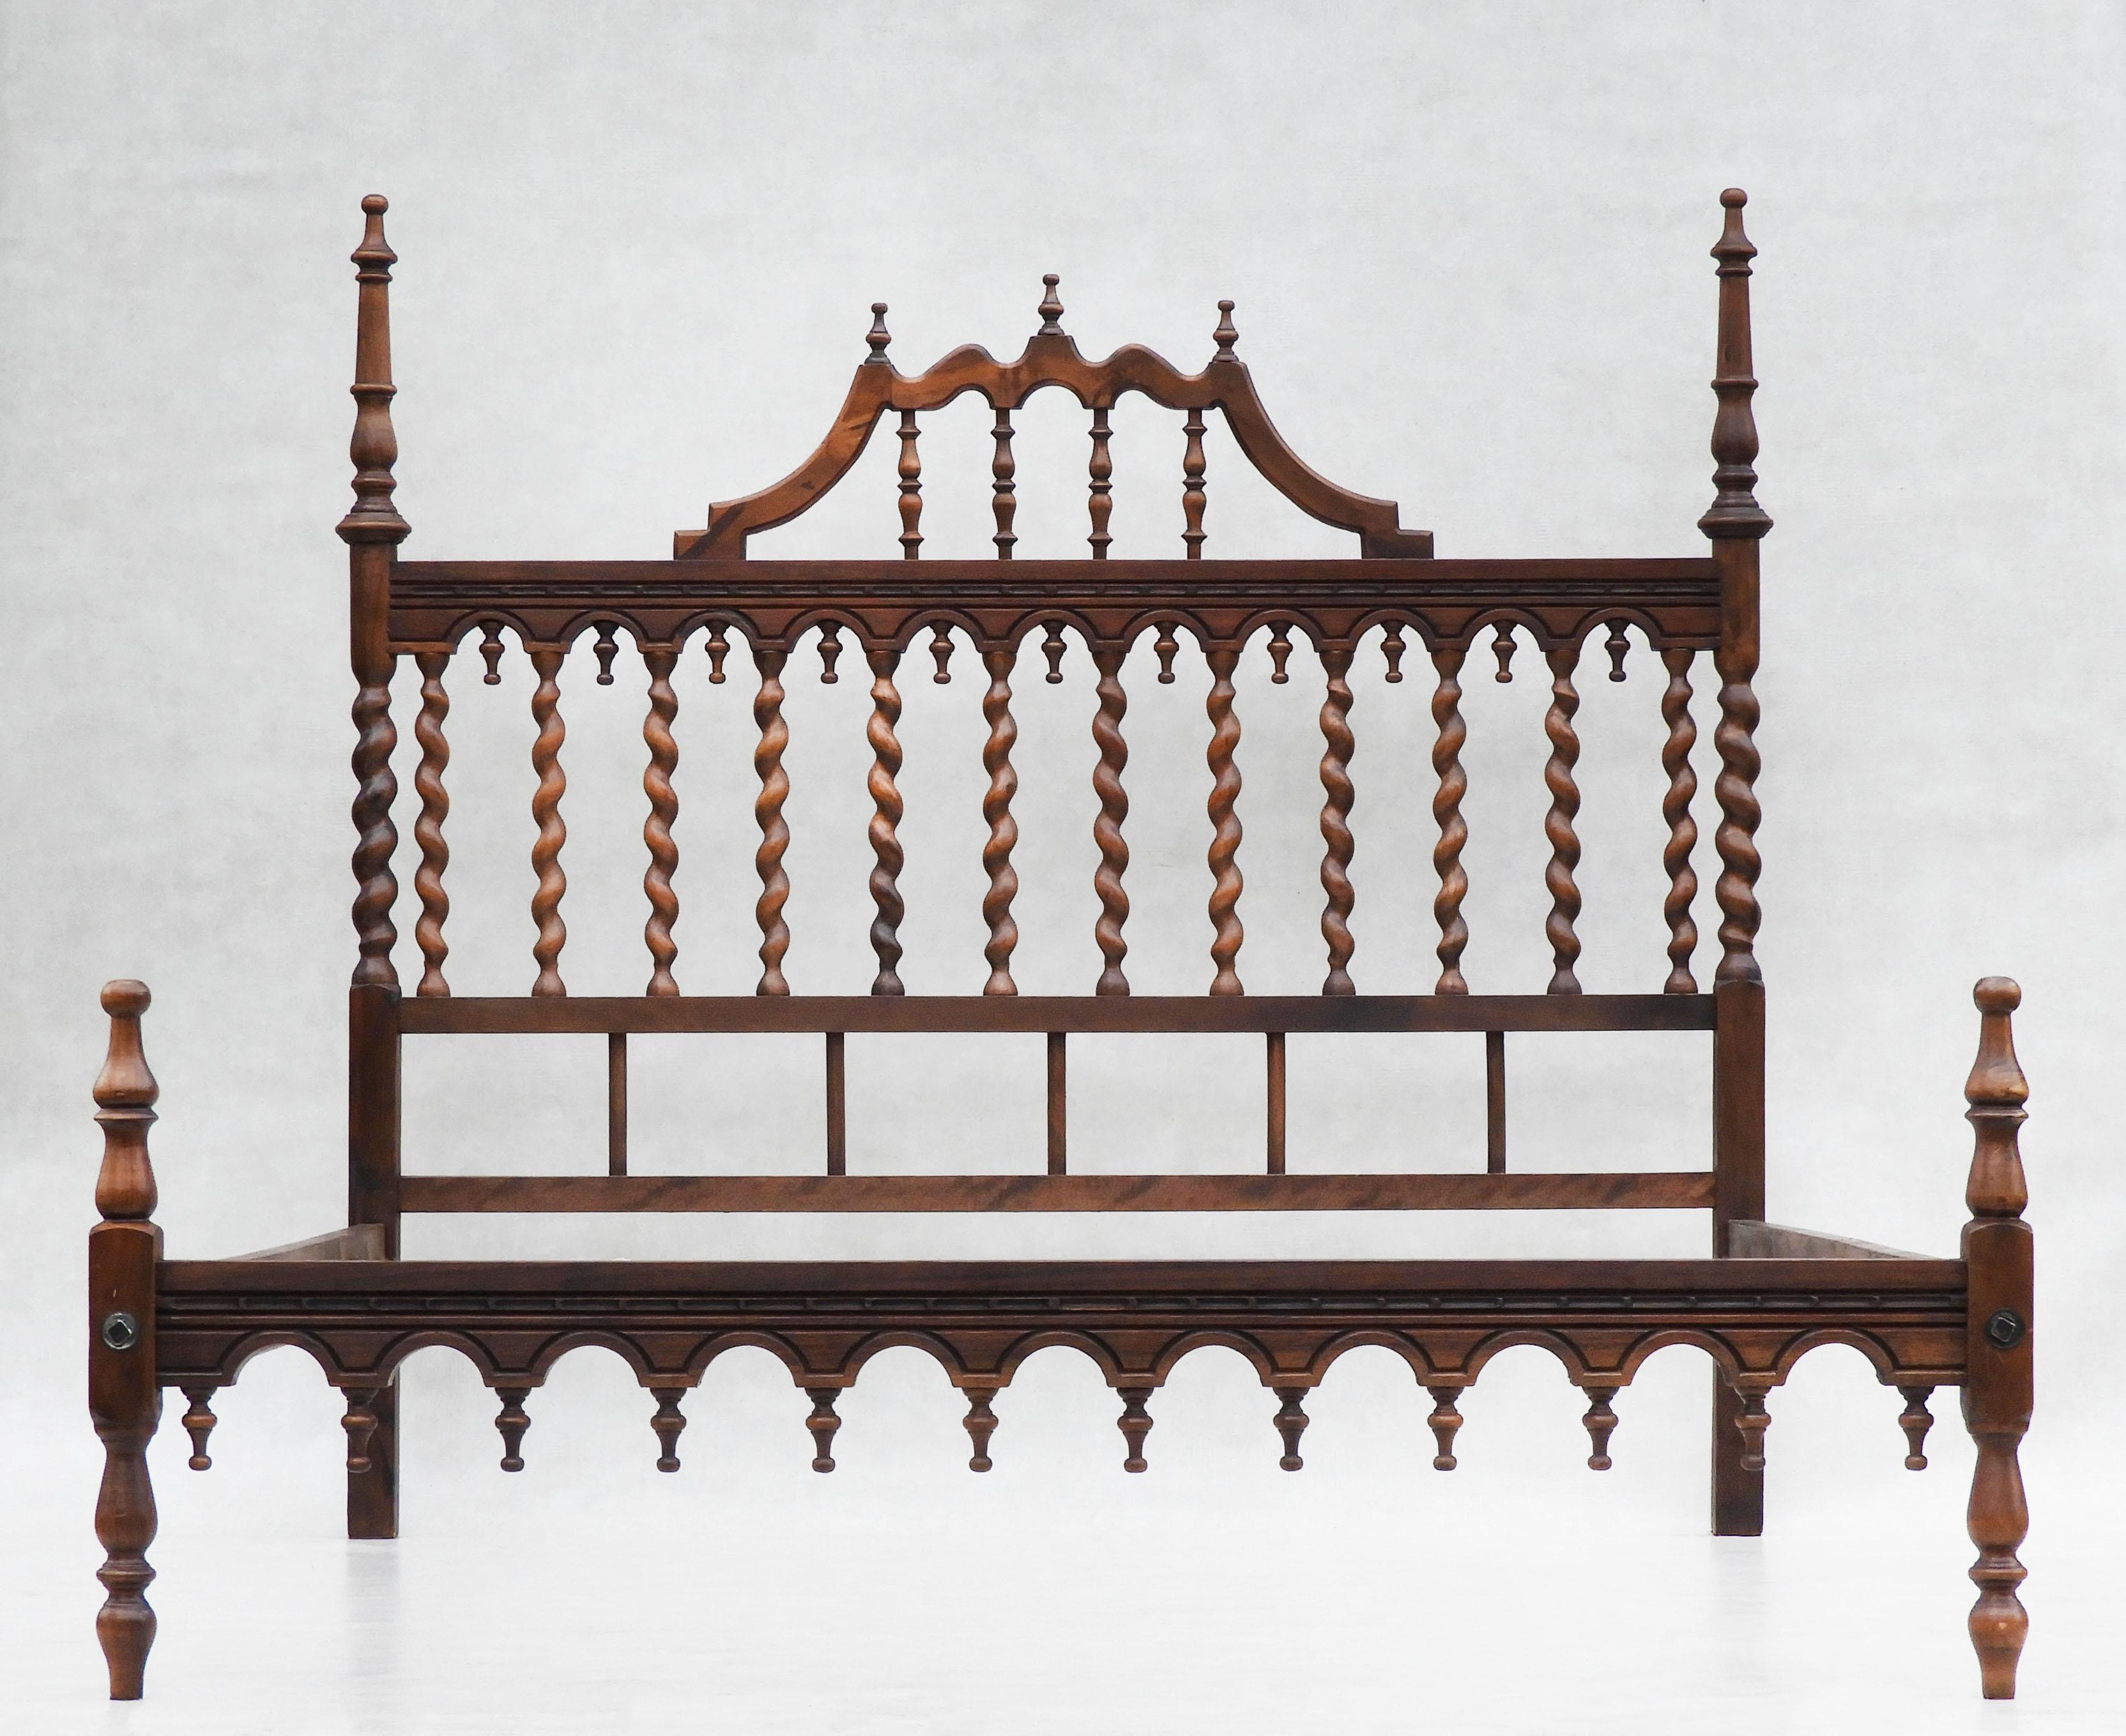 Antique Provincial Spanish bed spindle turned wood, Circa 1920

Gorgeous early 20th-century Spanish provincial bed.
Classic Iberian style, Artisan crafted bed with beautiful barley twist, finial and hand-carved detailing
In very good condition, nice